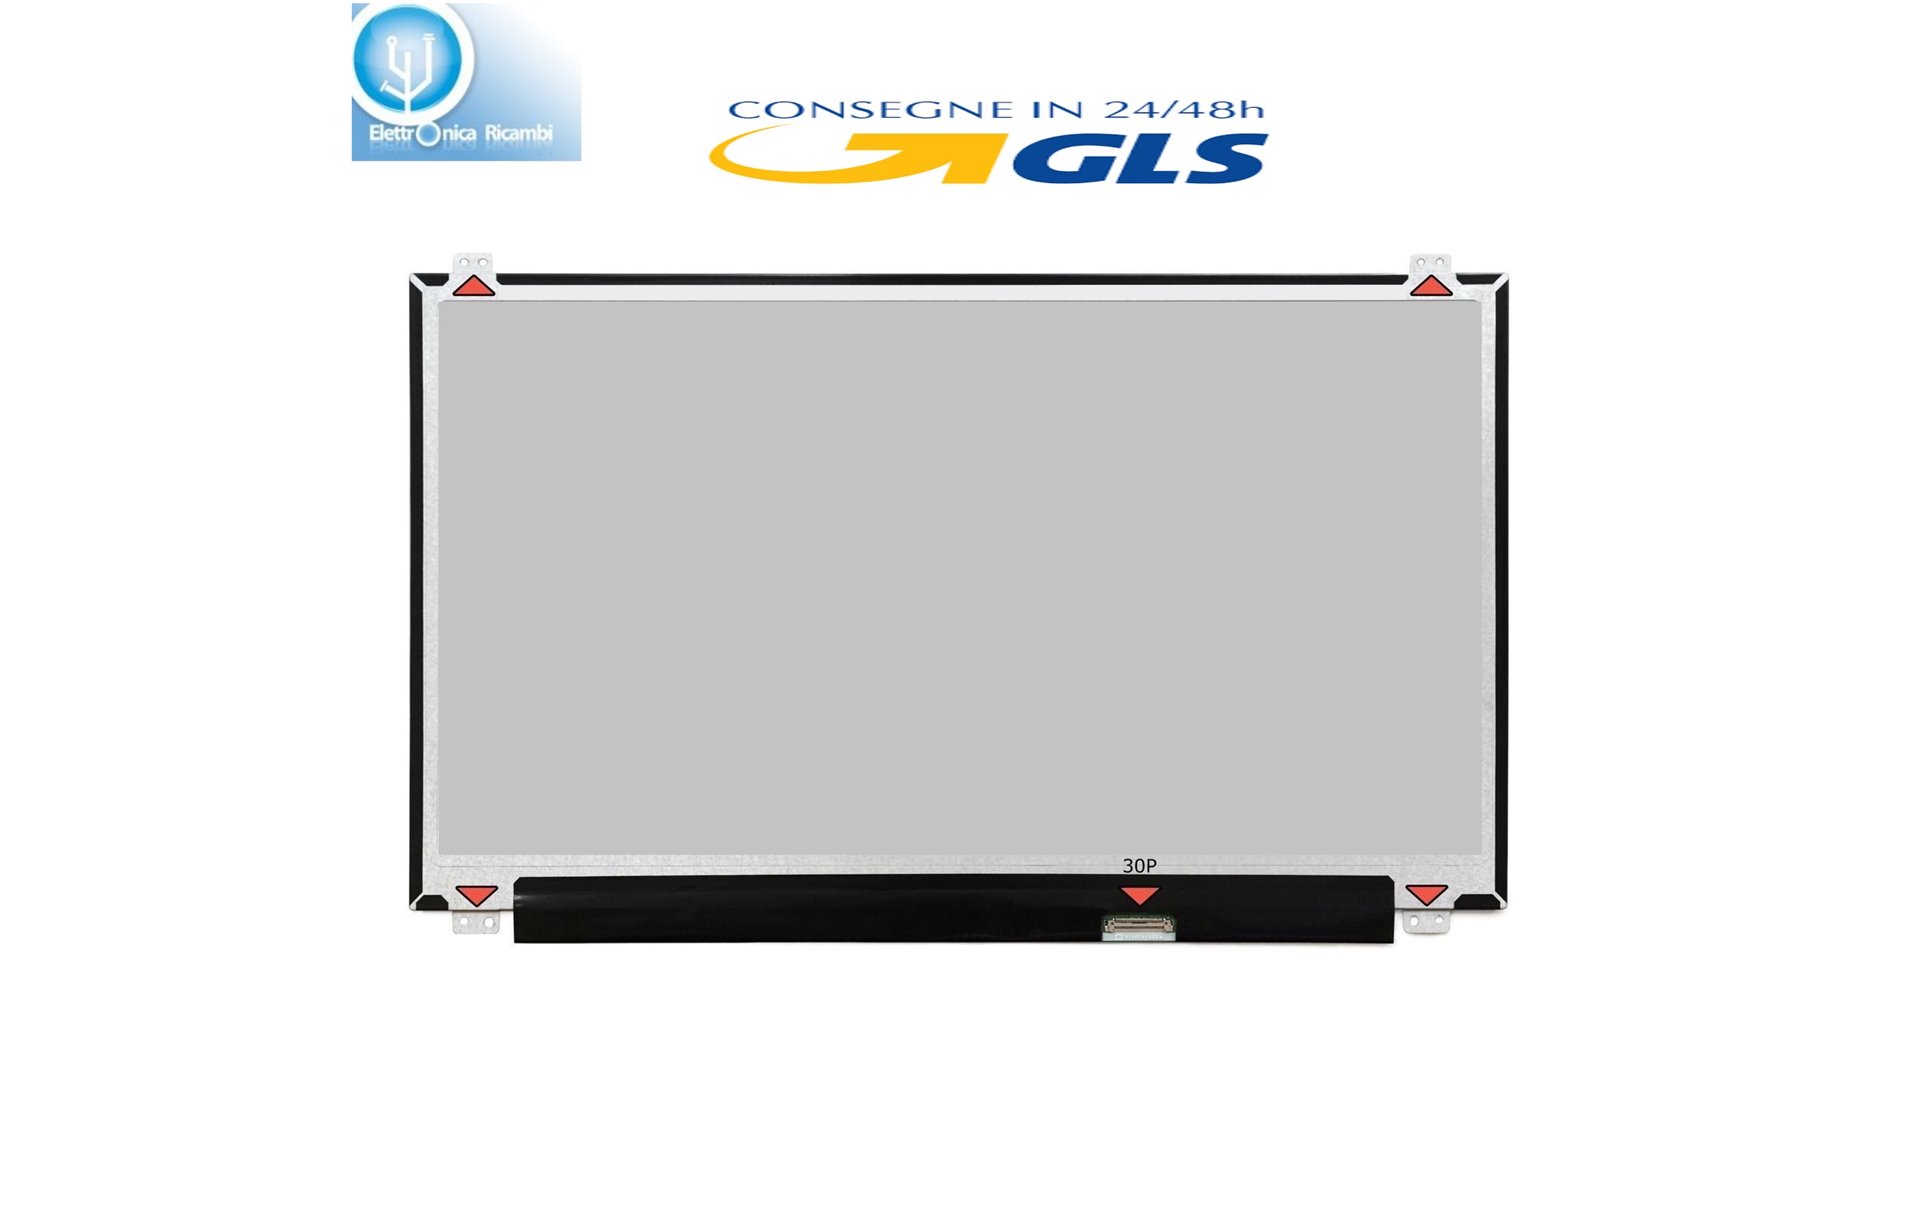 DISPLAY LCD Acer ASPIRE V7-581PG SERIES 15.6 WideScreen (13.6"x7.6") LED